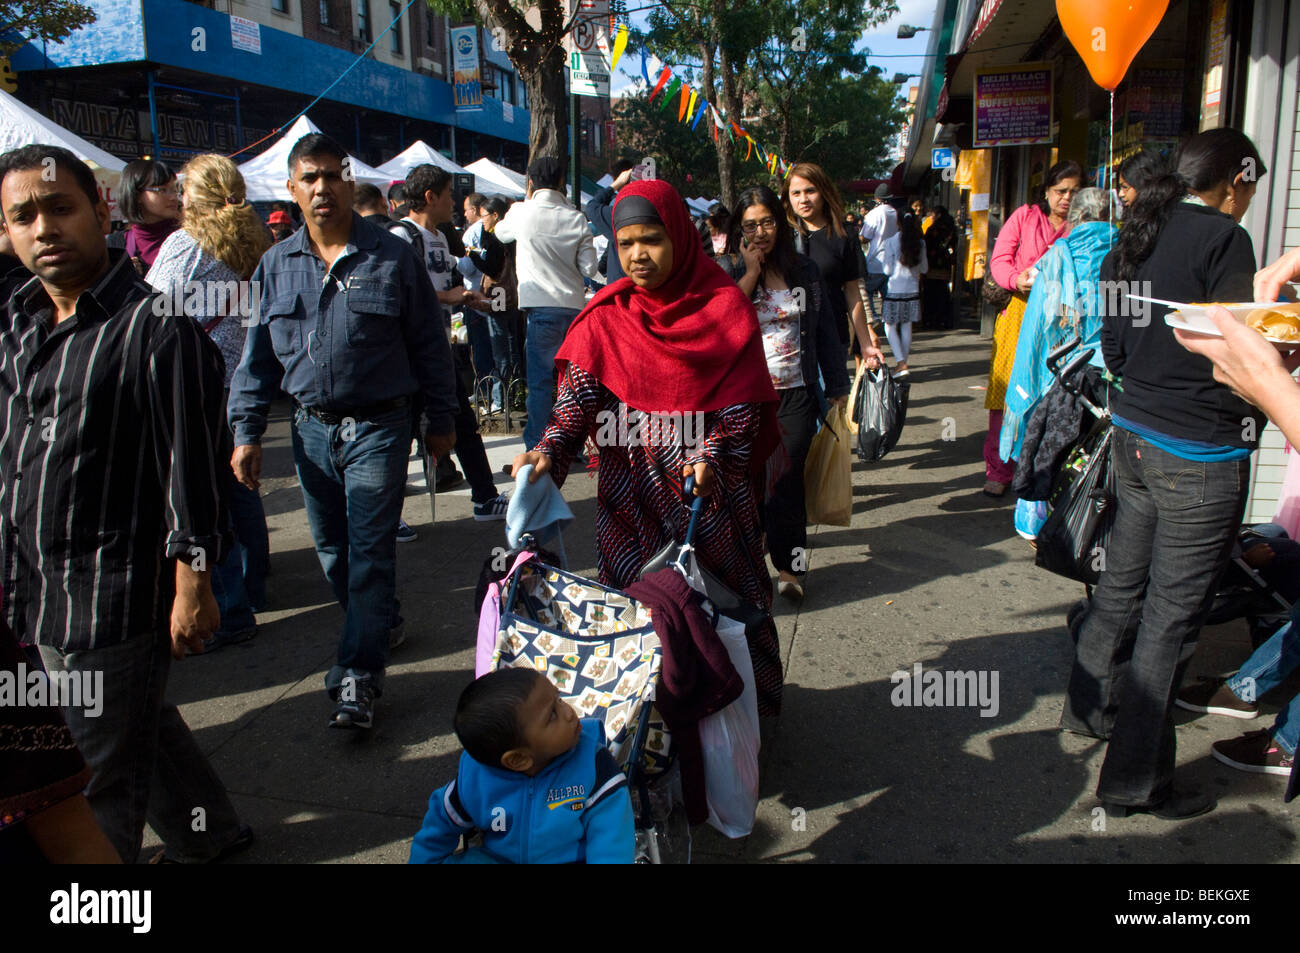 A Moslem woman pushes a child in a stroller at the Indian celebration of Diwali at a street fair in Jackson Heights, Queens, NY Stock Photo